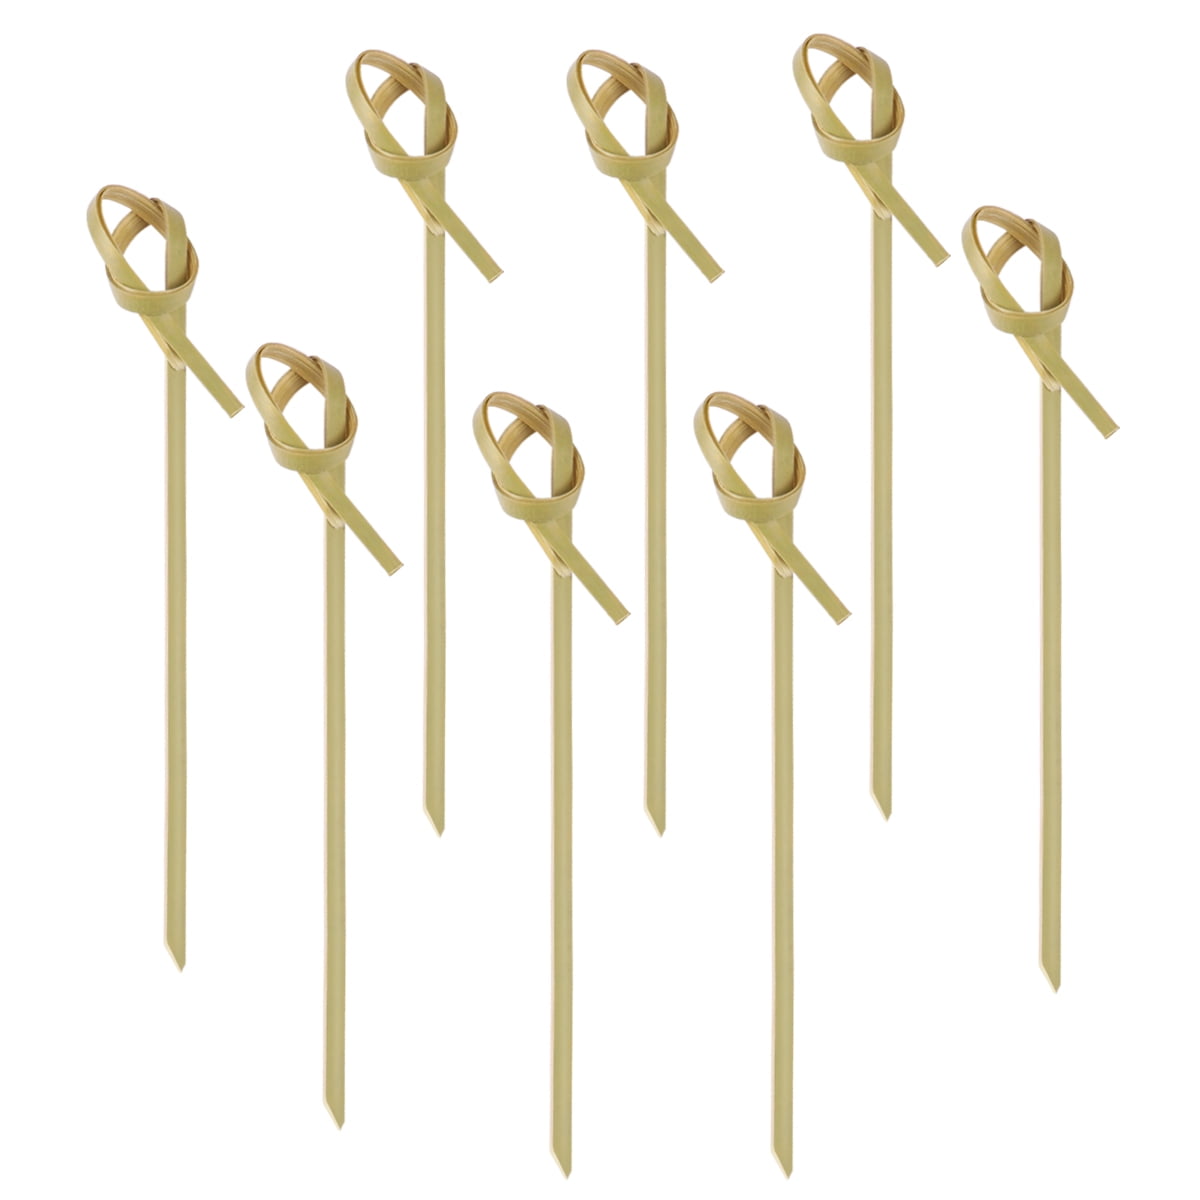 Bamboo Cocktail Picks With Looped Knot Keeps Ingredients Pinned Together 4.1 inch Stylish - Natural Bamboo Club Sandwiches Great for Cocktail Party or Barbeque Snacks etc 300 Pack